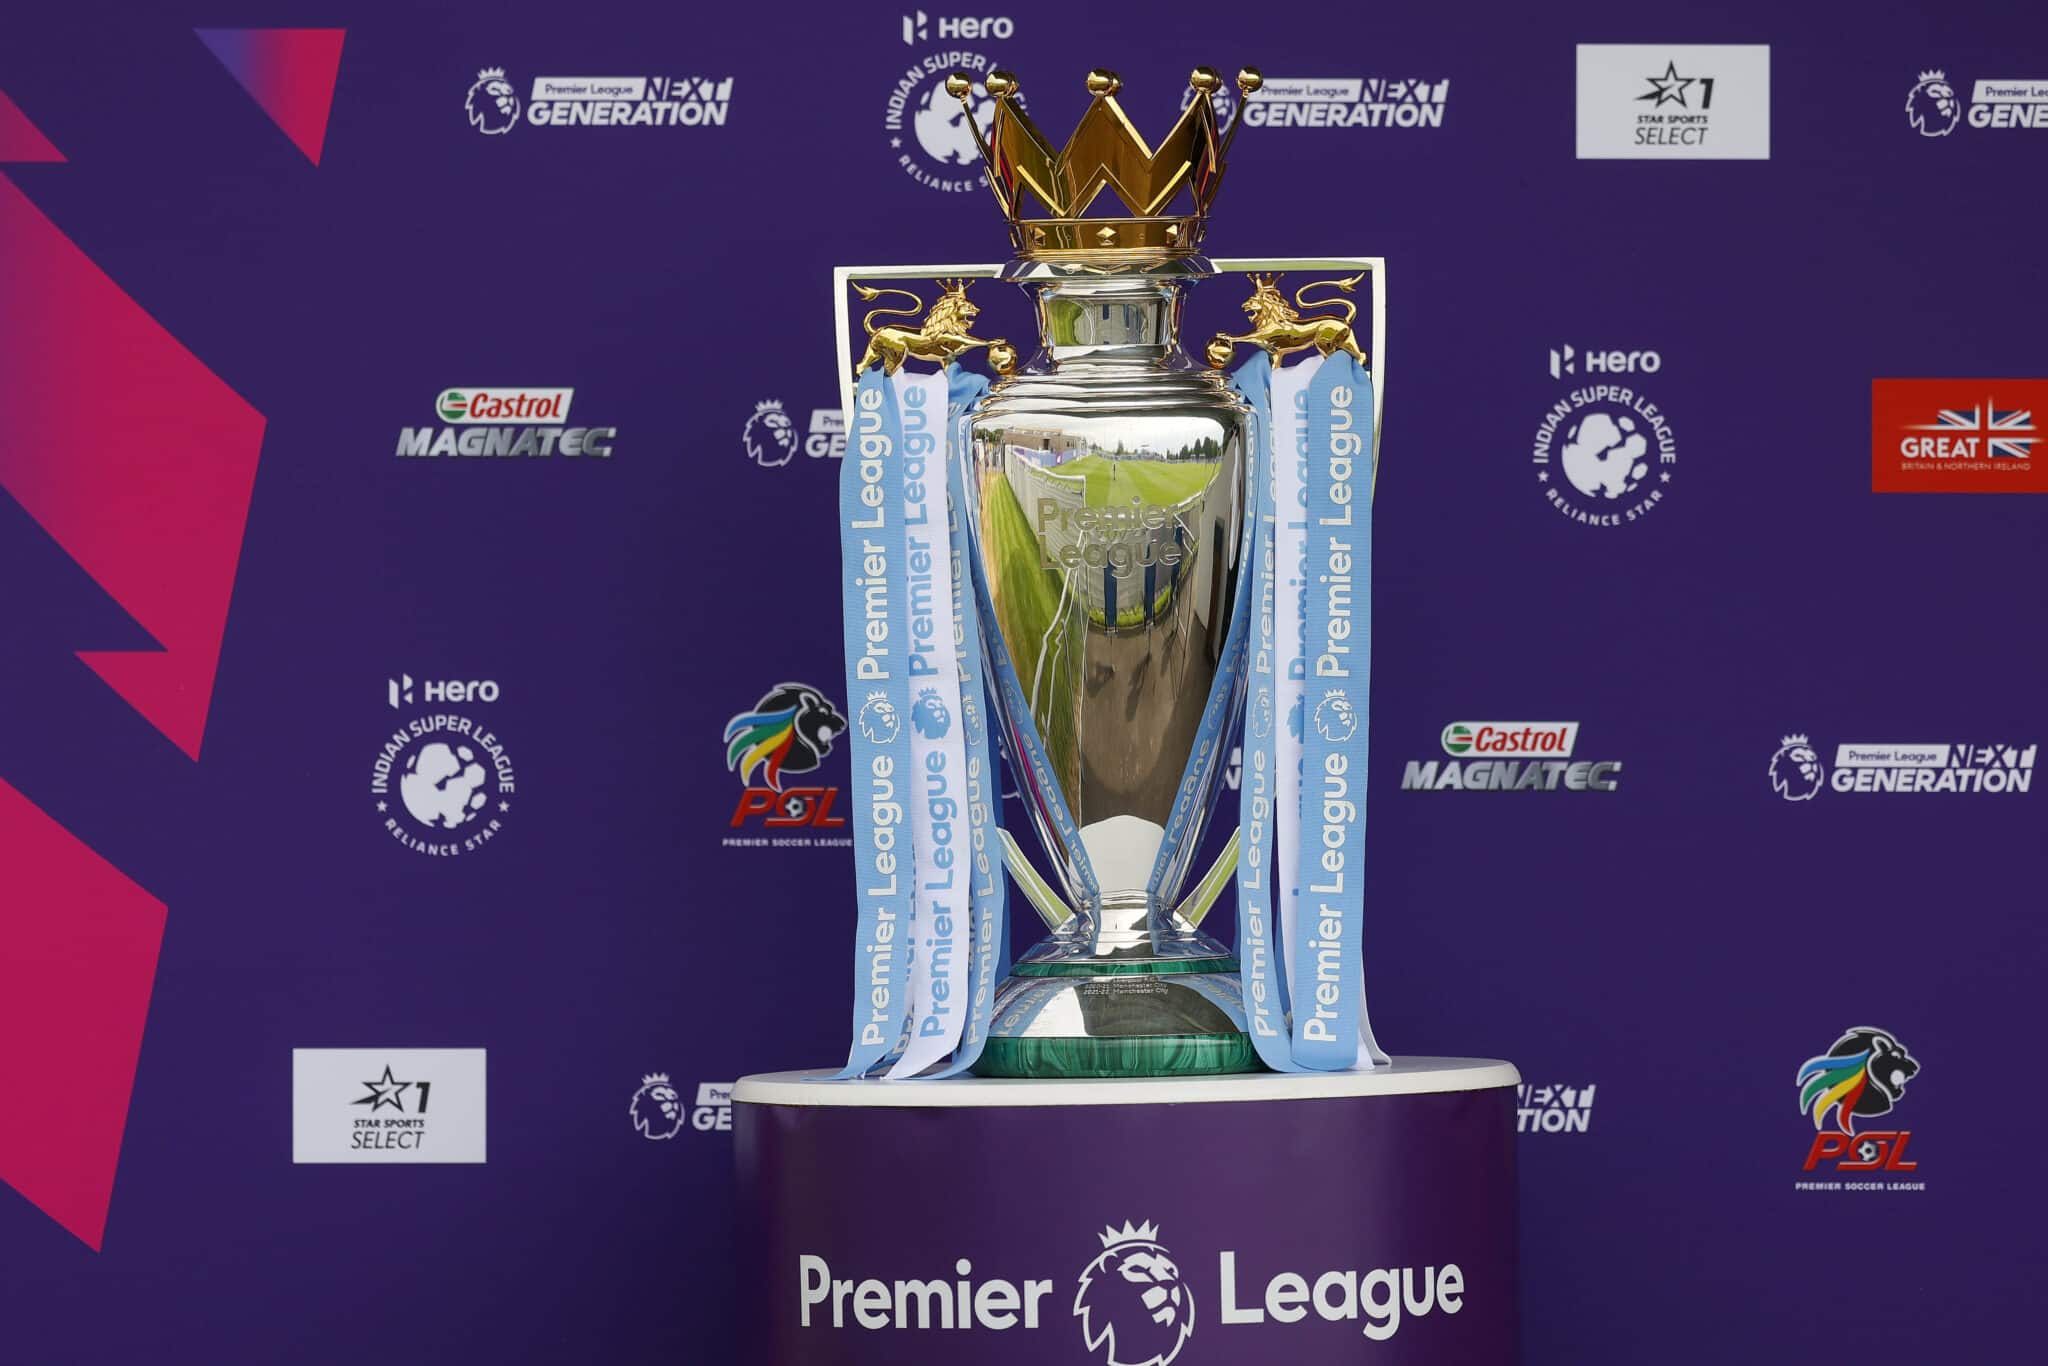 Who's going to win the Premier League?